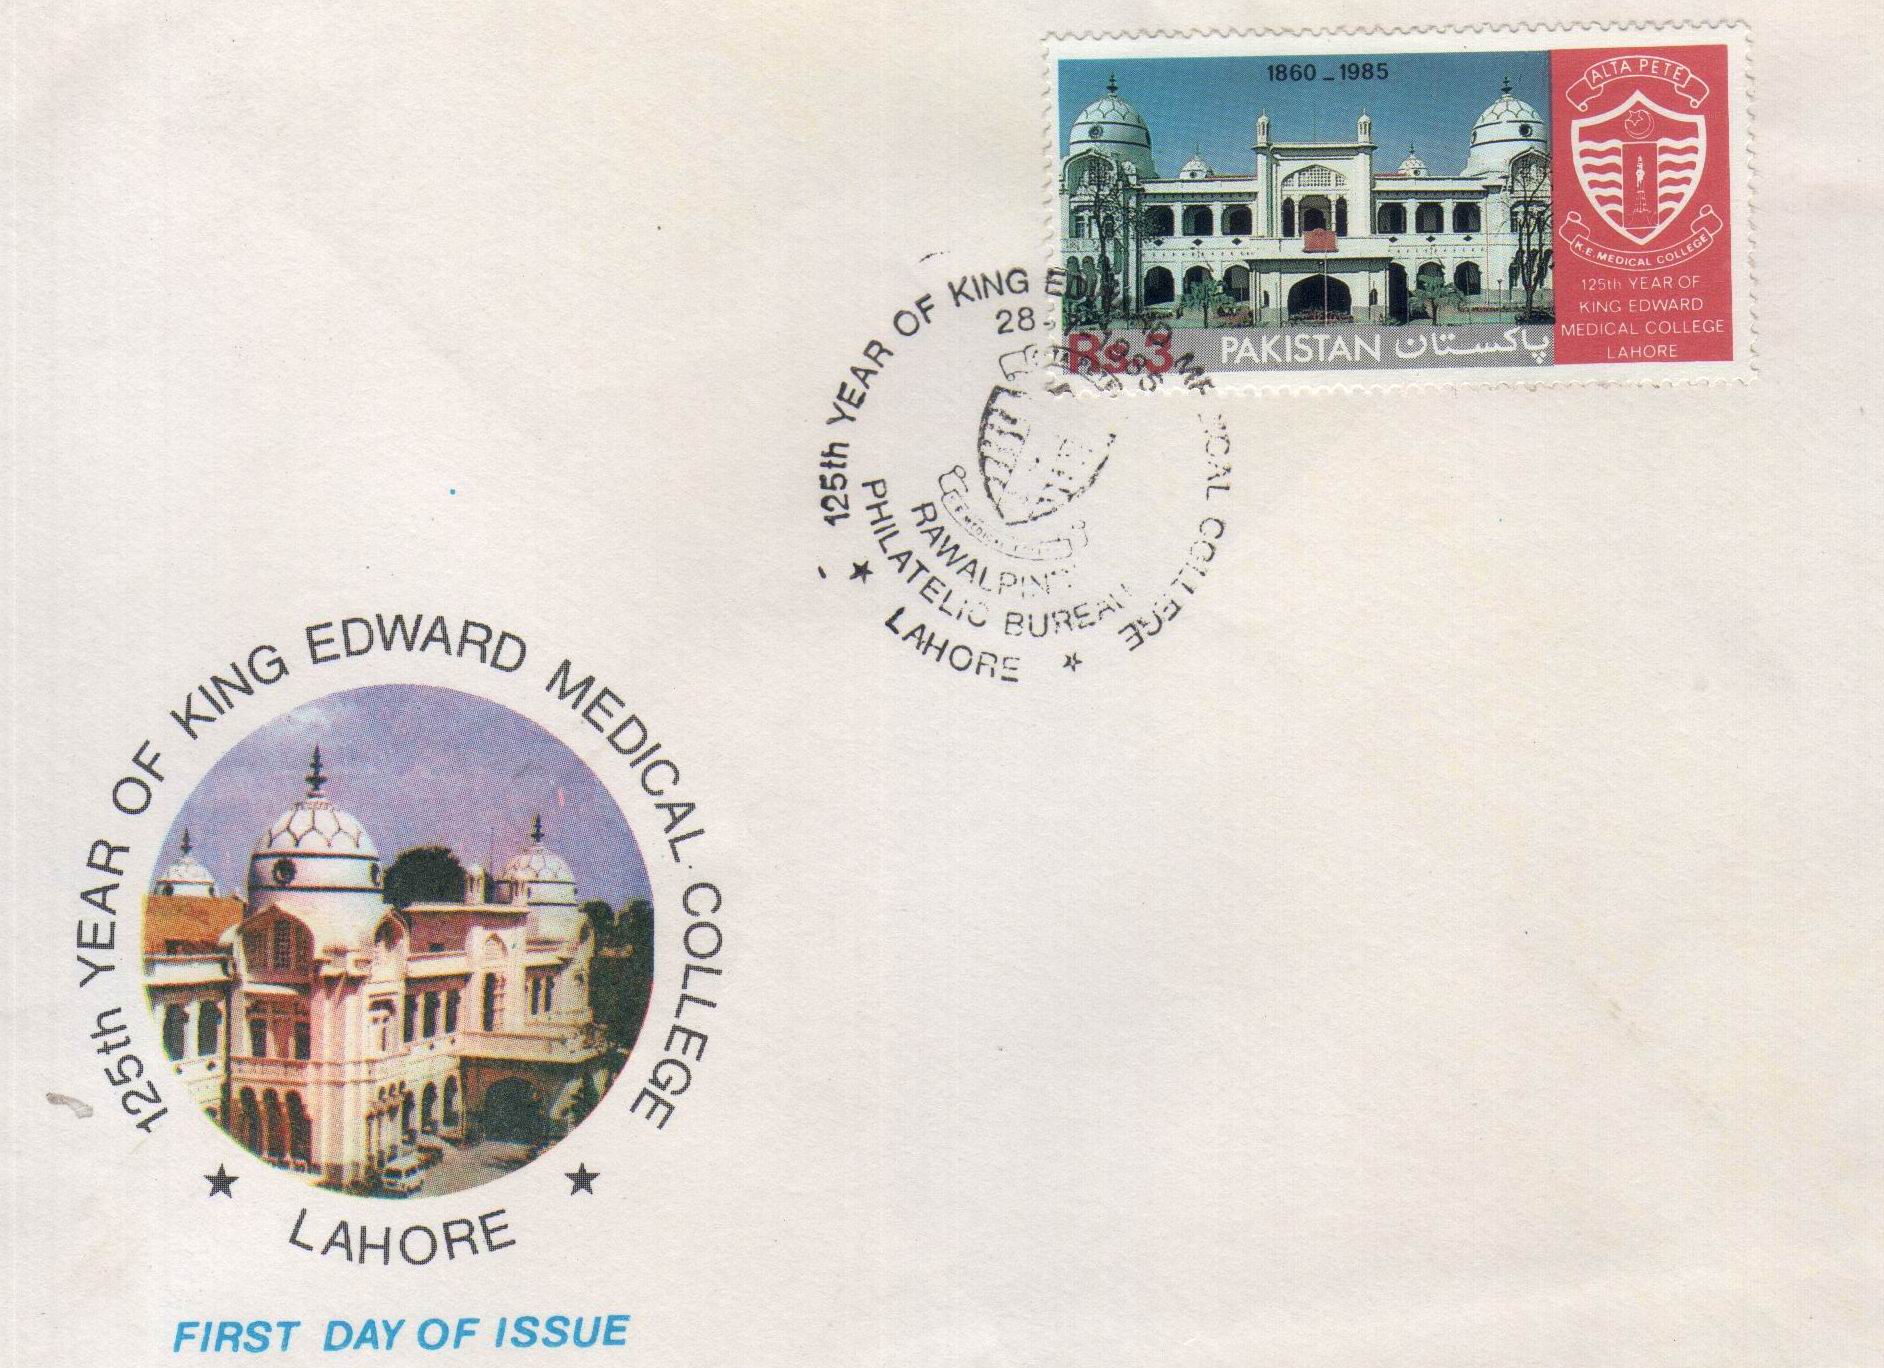 Pakistan Fdc 1985 Brochure & Stamp King Edward Medical College - Click Image to Close